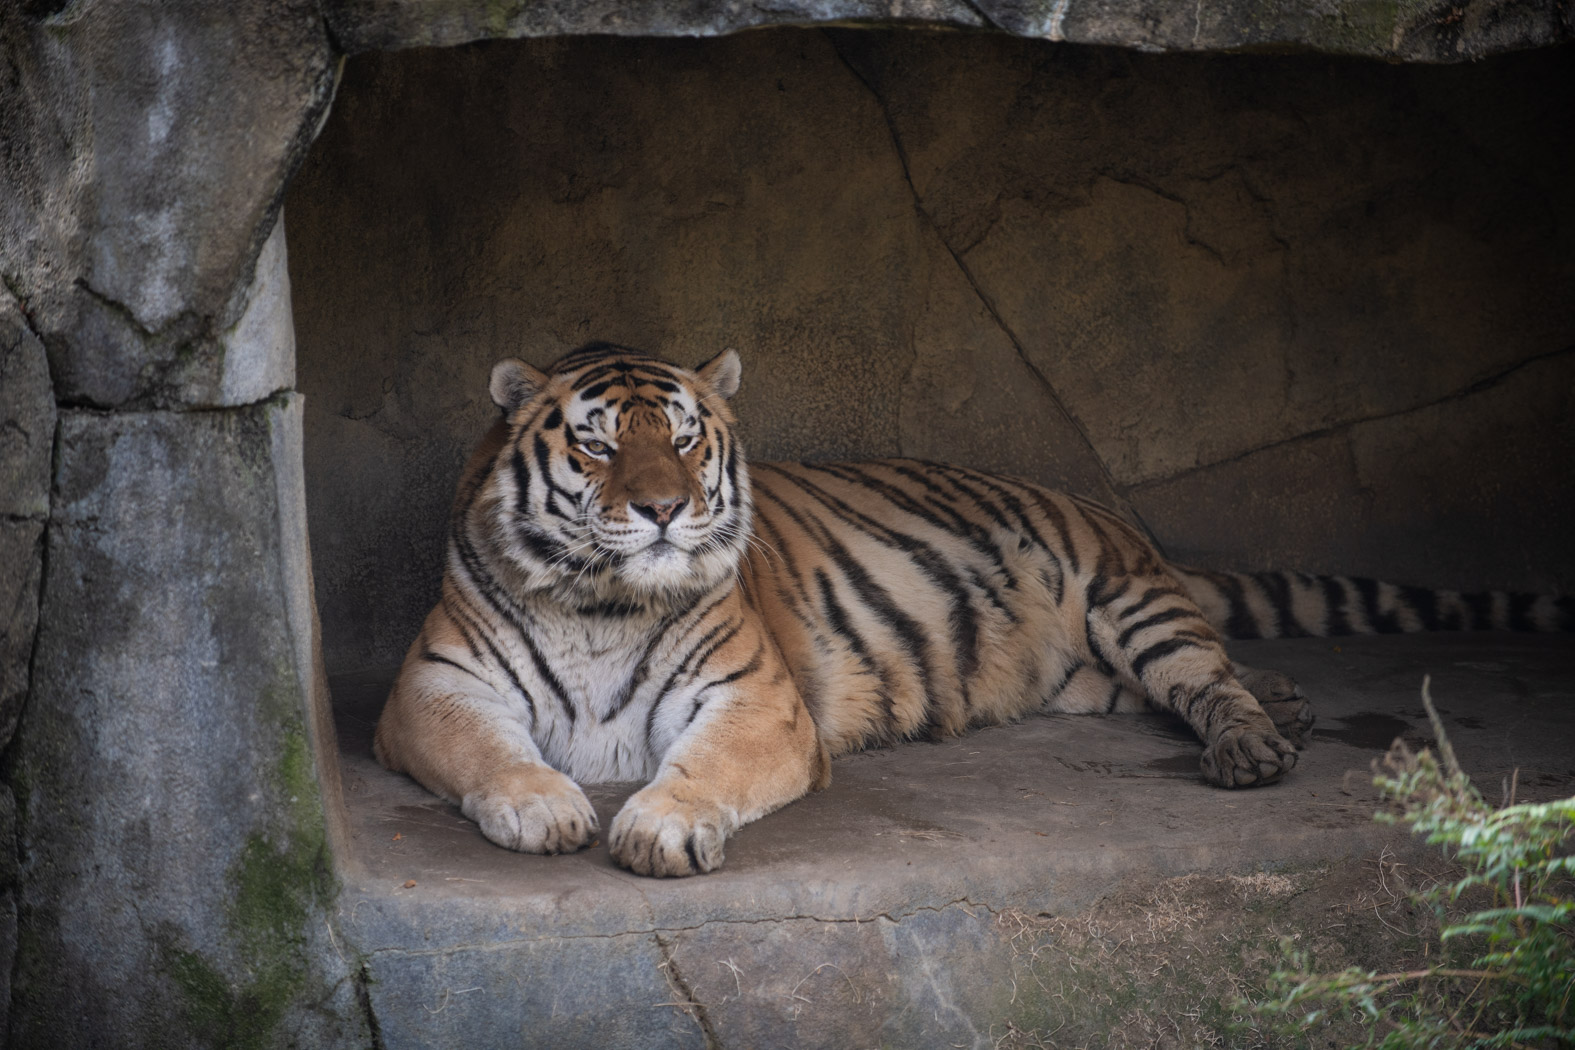 PHOTO: Jupiter, a 14-year-old Amur tiger, passed away on Sunday, June 26, 2022, after officials at the Columbus Zoo confirmed that he had developed pneumonia which was caused by the COVID-19 virus.